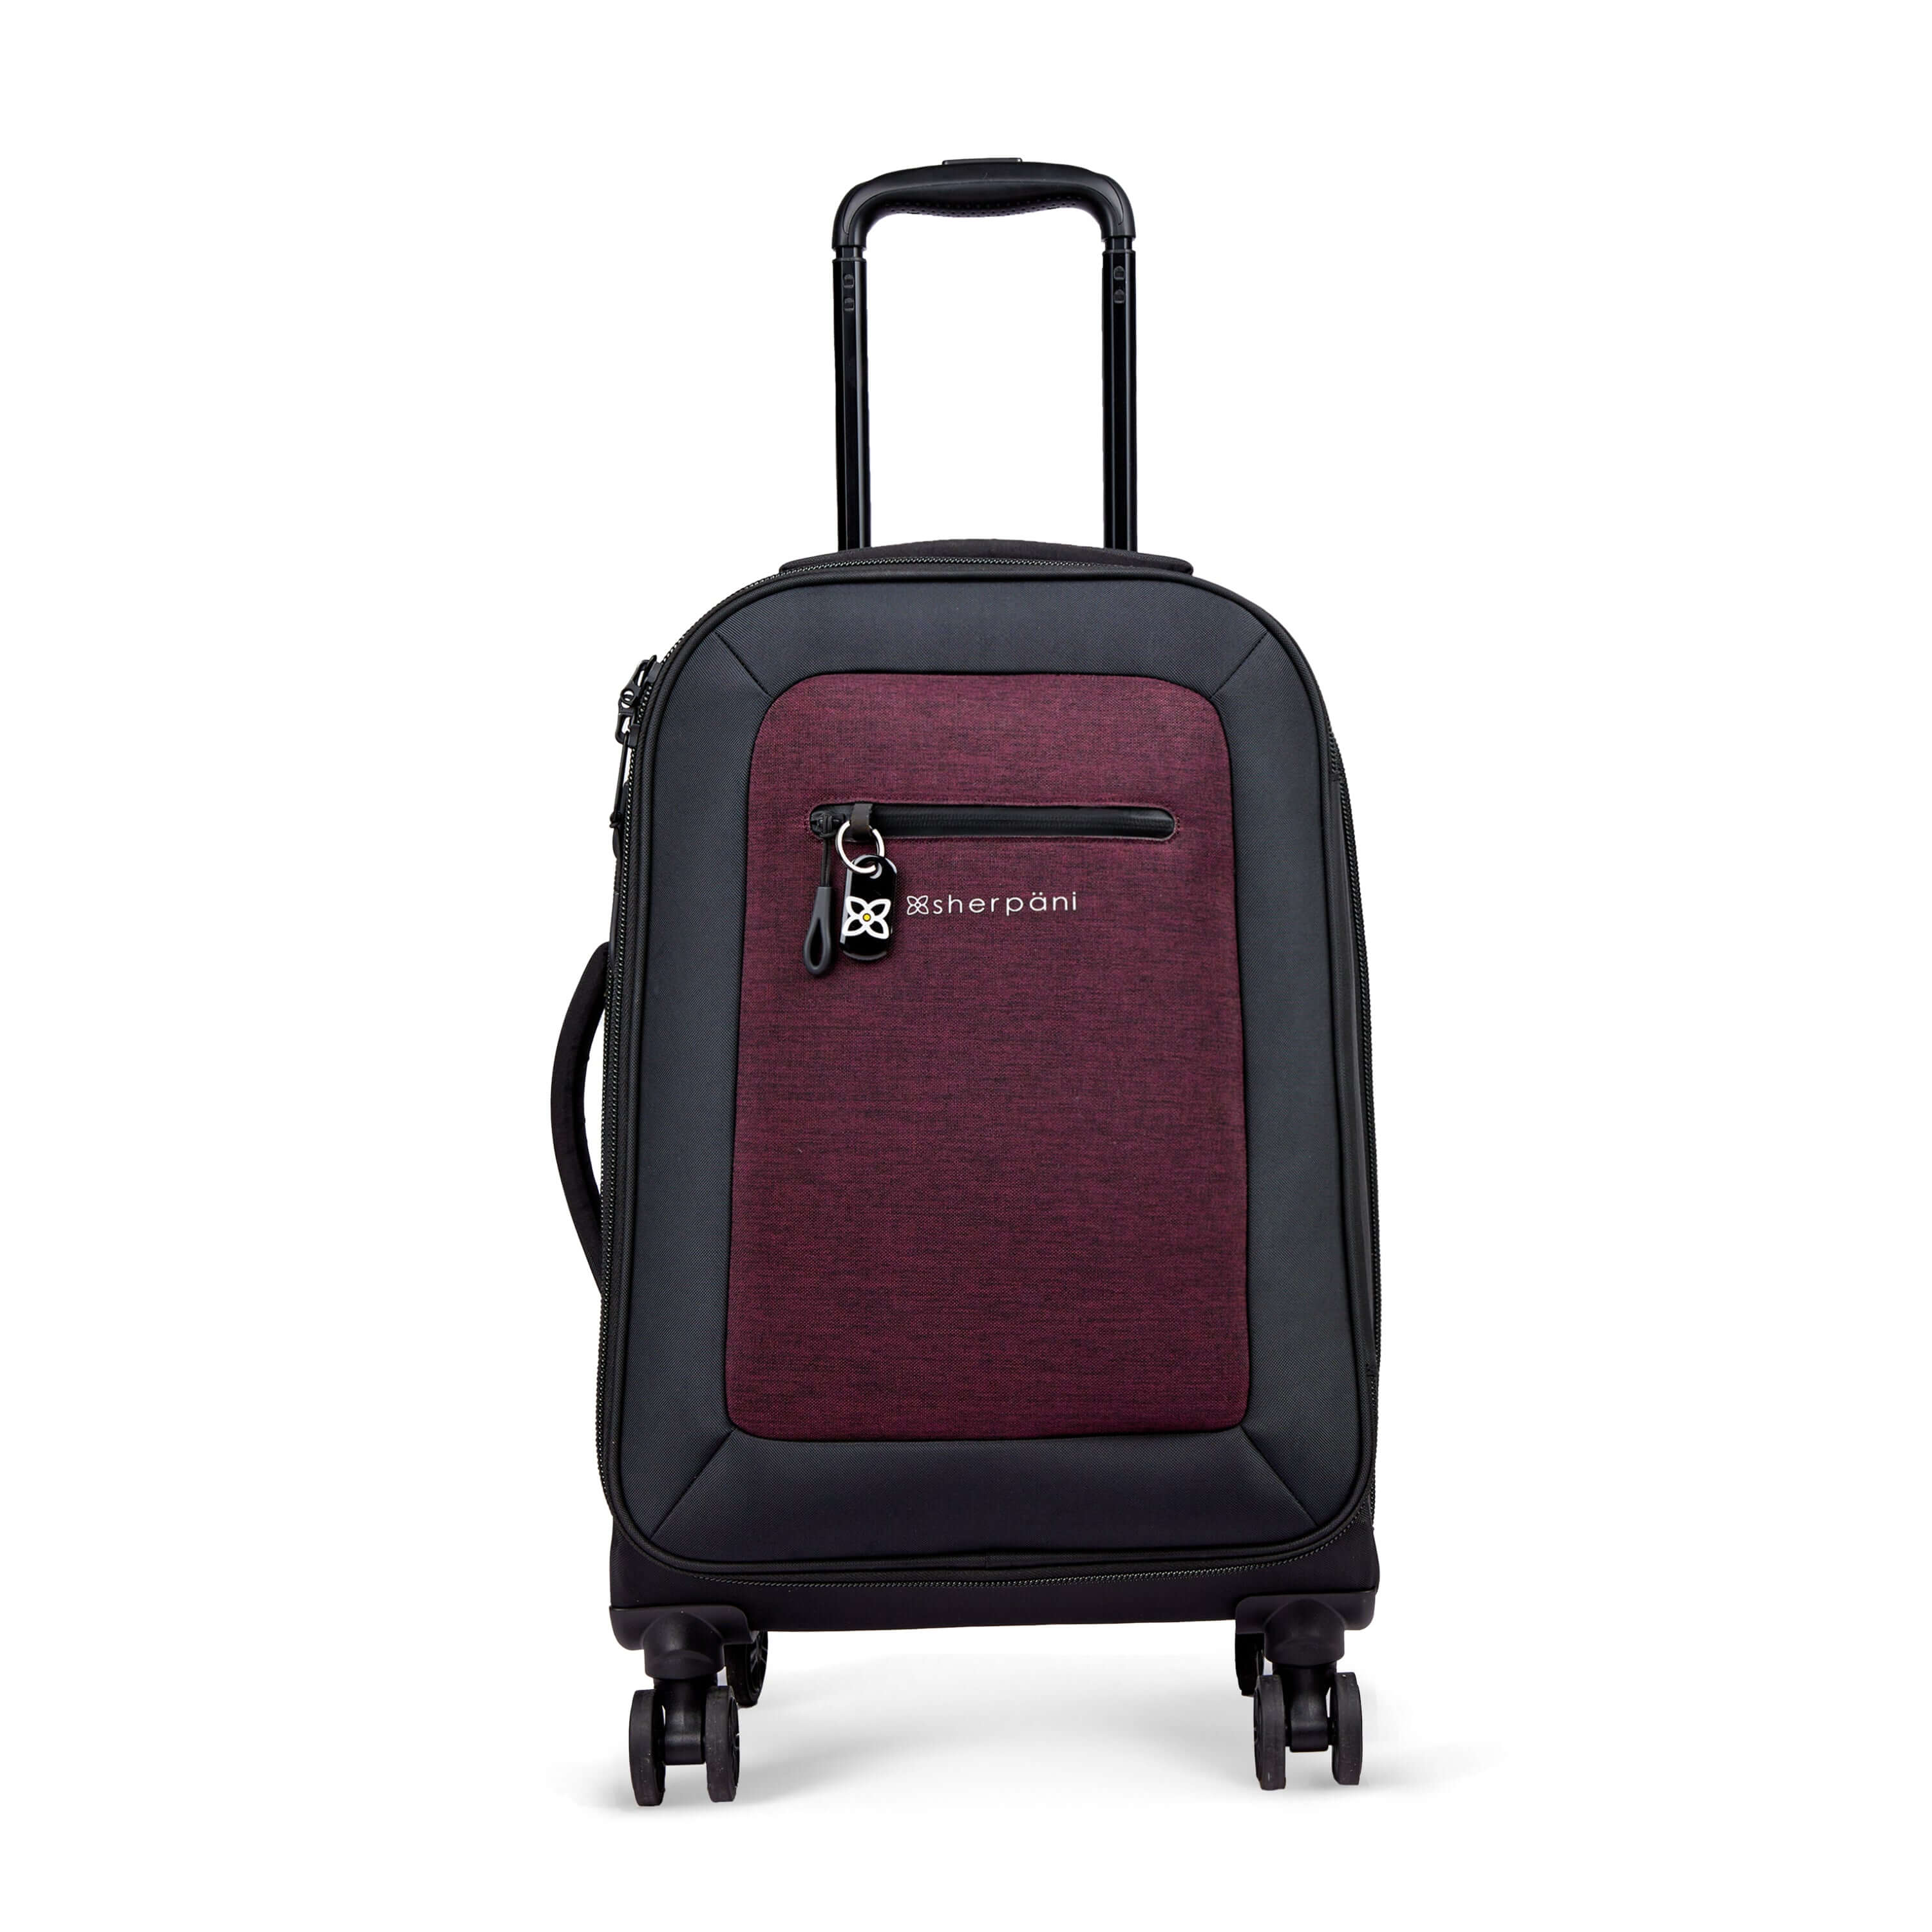 Flat front view of Sherpani's Anti-Theft luggage the Latitude in Merlot. The suitcase has a soft shell exterior made from recycled plastic bottles and features vegan leather accents in black. There is a main zipper compartment, an expansion zipper and an external pocket on the front with a locking zipper and a ReturnMe tag. On the top of the suitcase sits a retractable luggage handle. On the side sits an easy-access handle. 